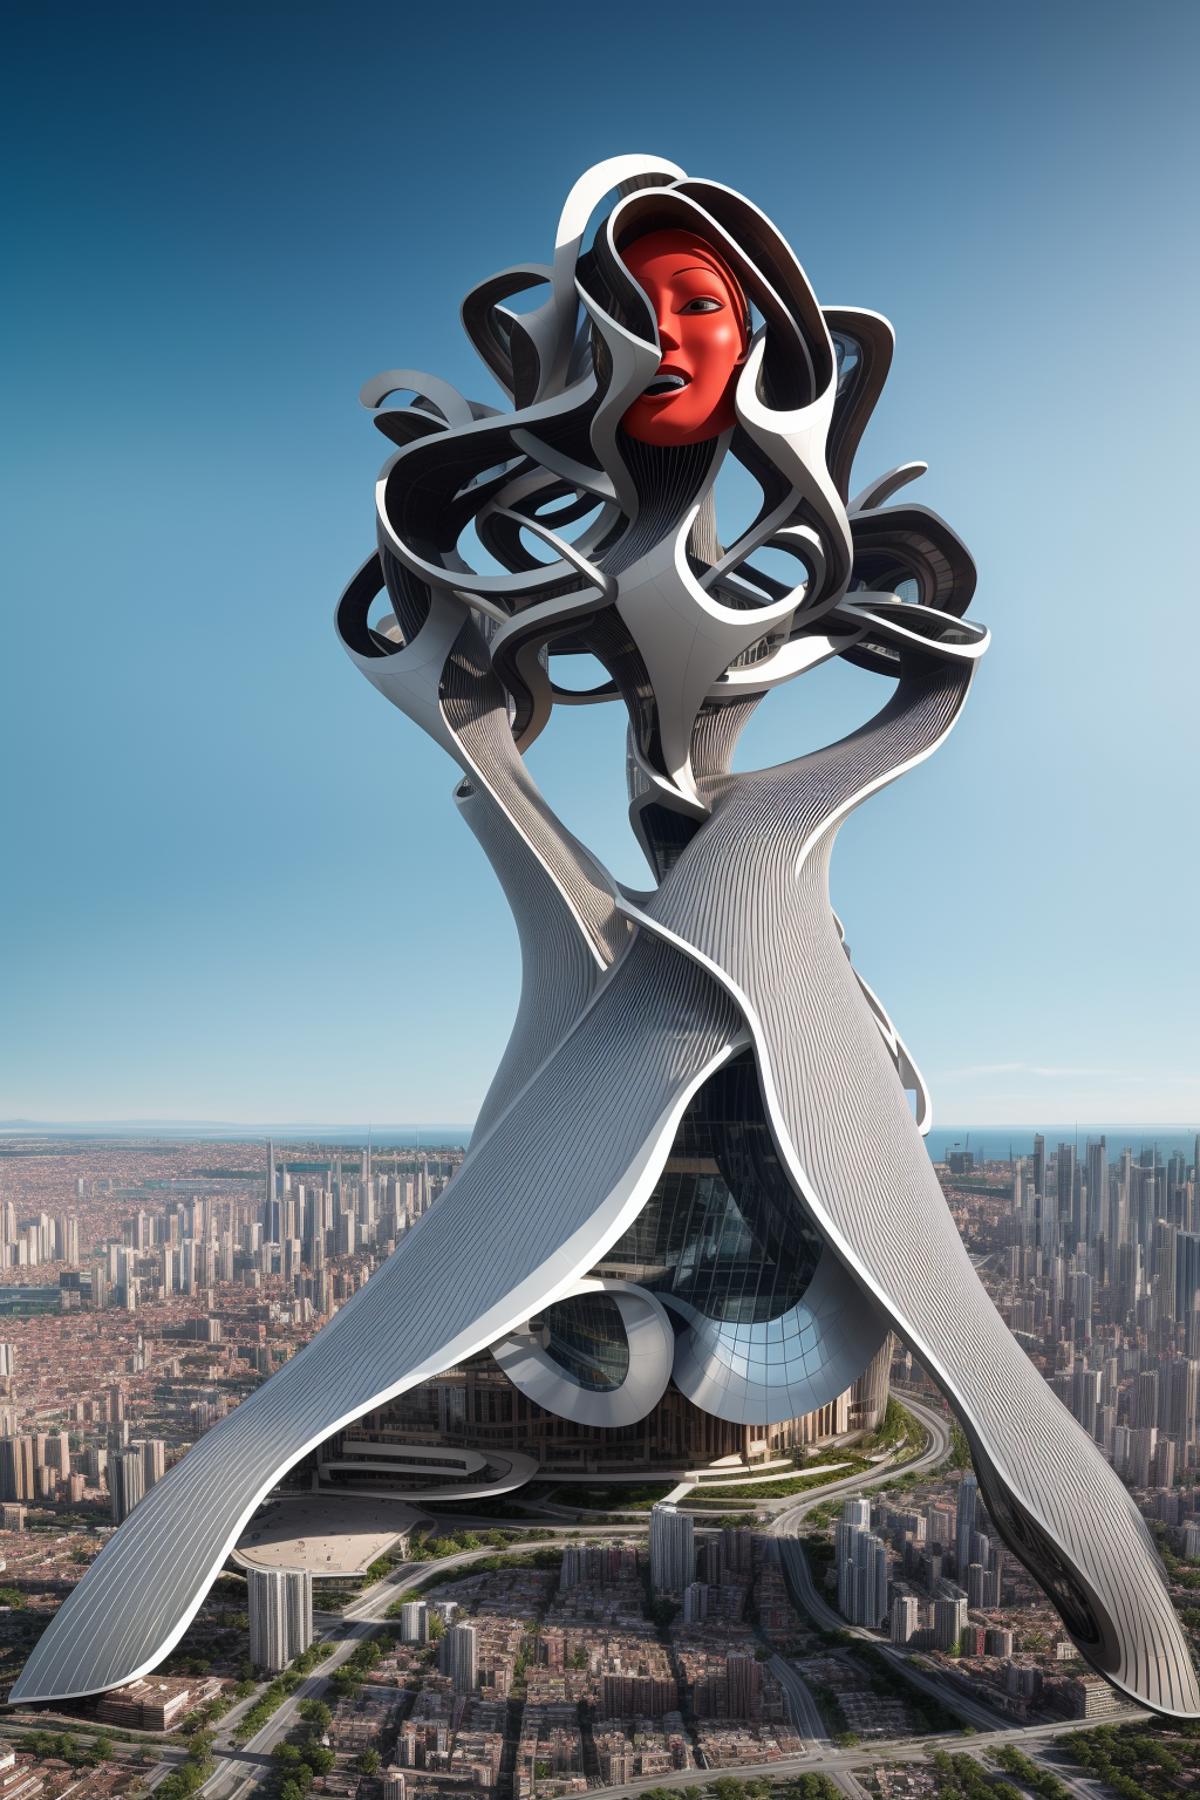 Futuristic Skyscraper with Giant Woman Statue at the Top